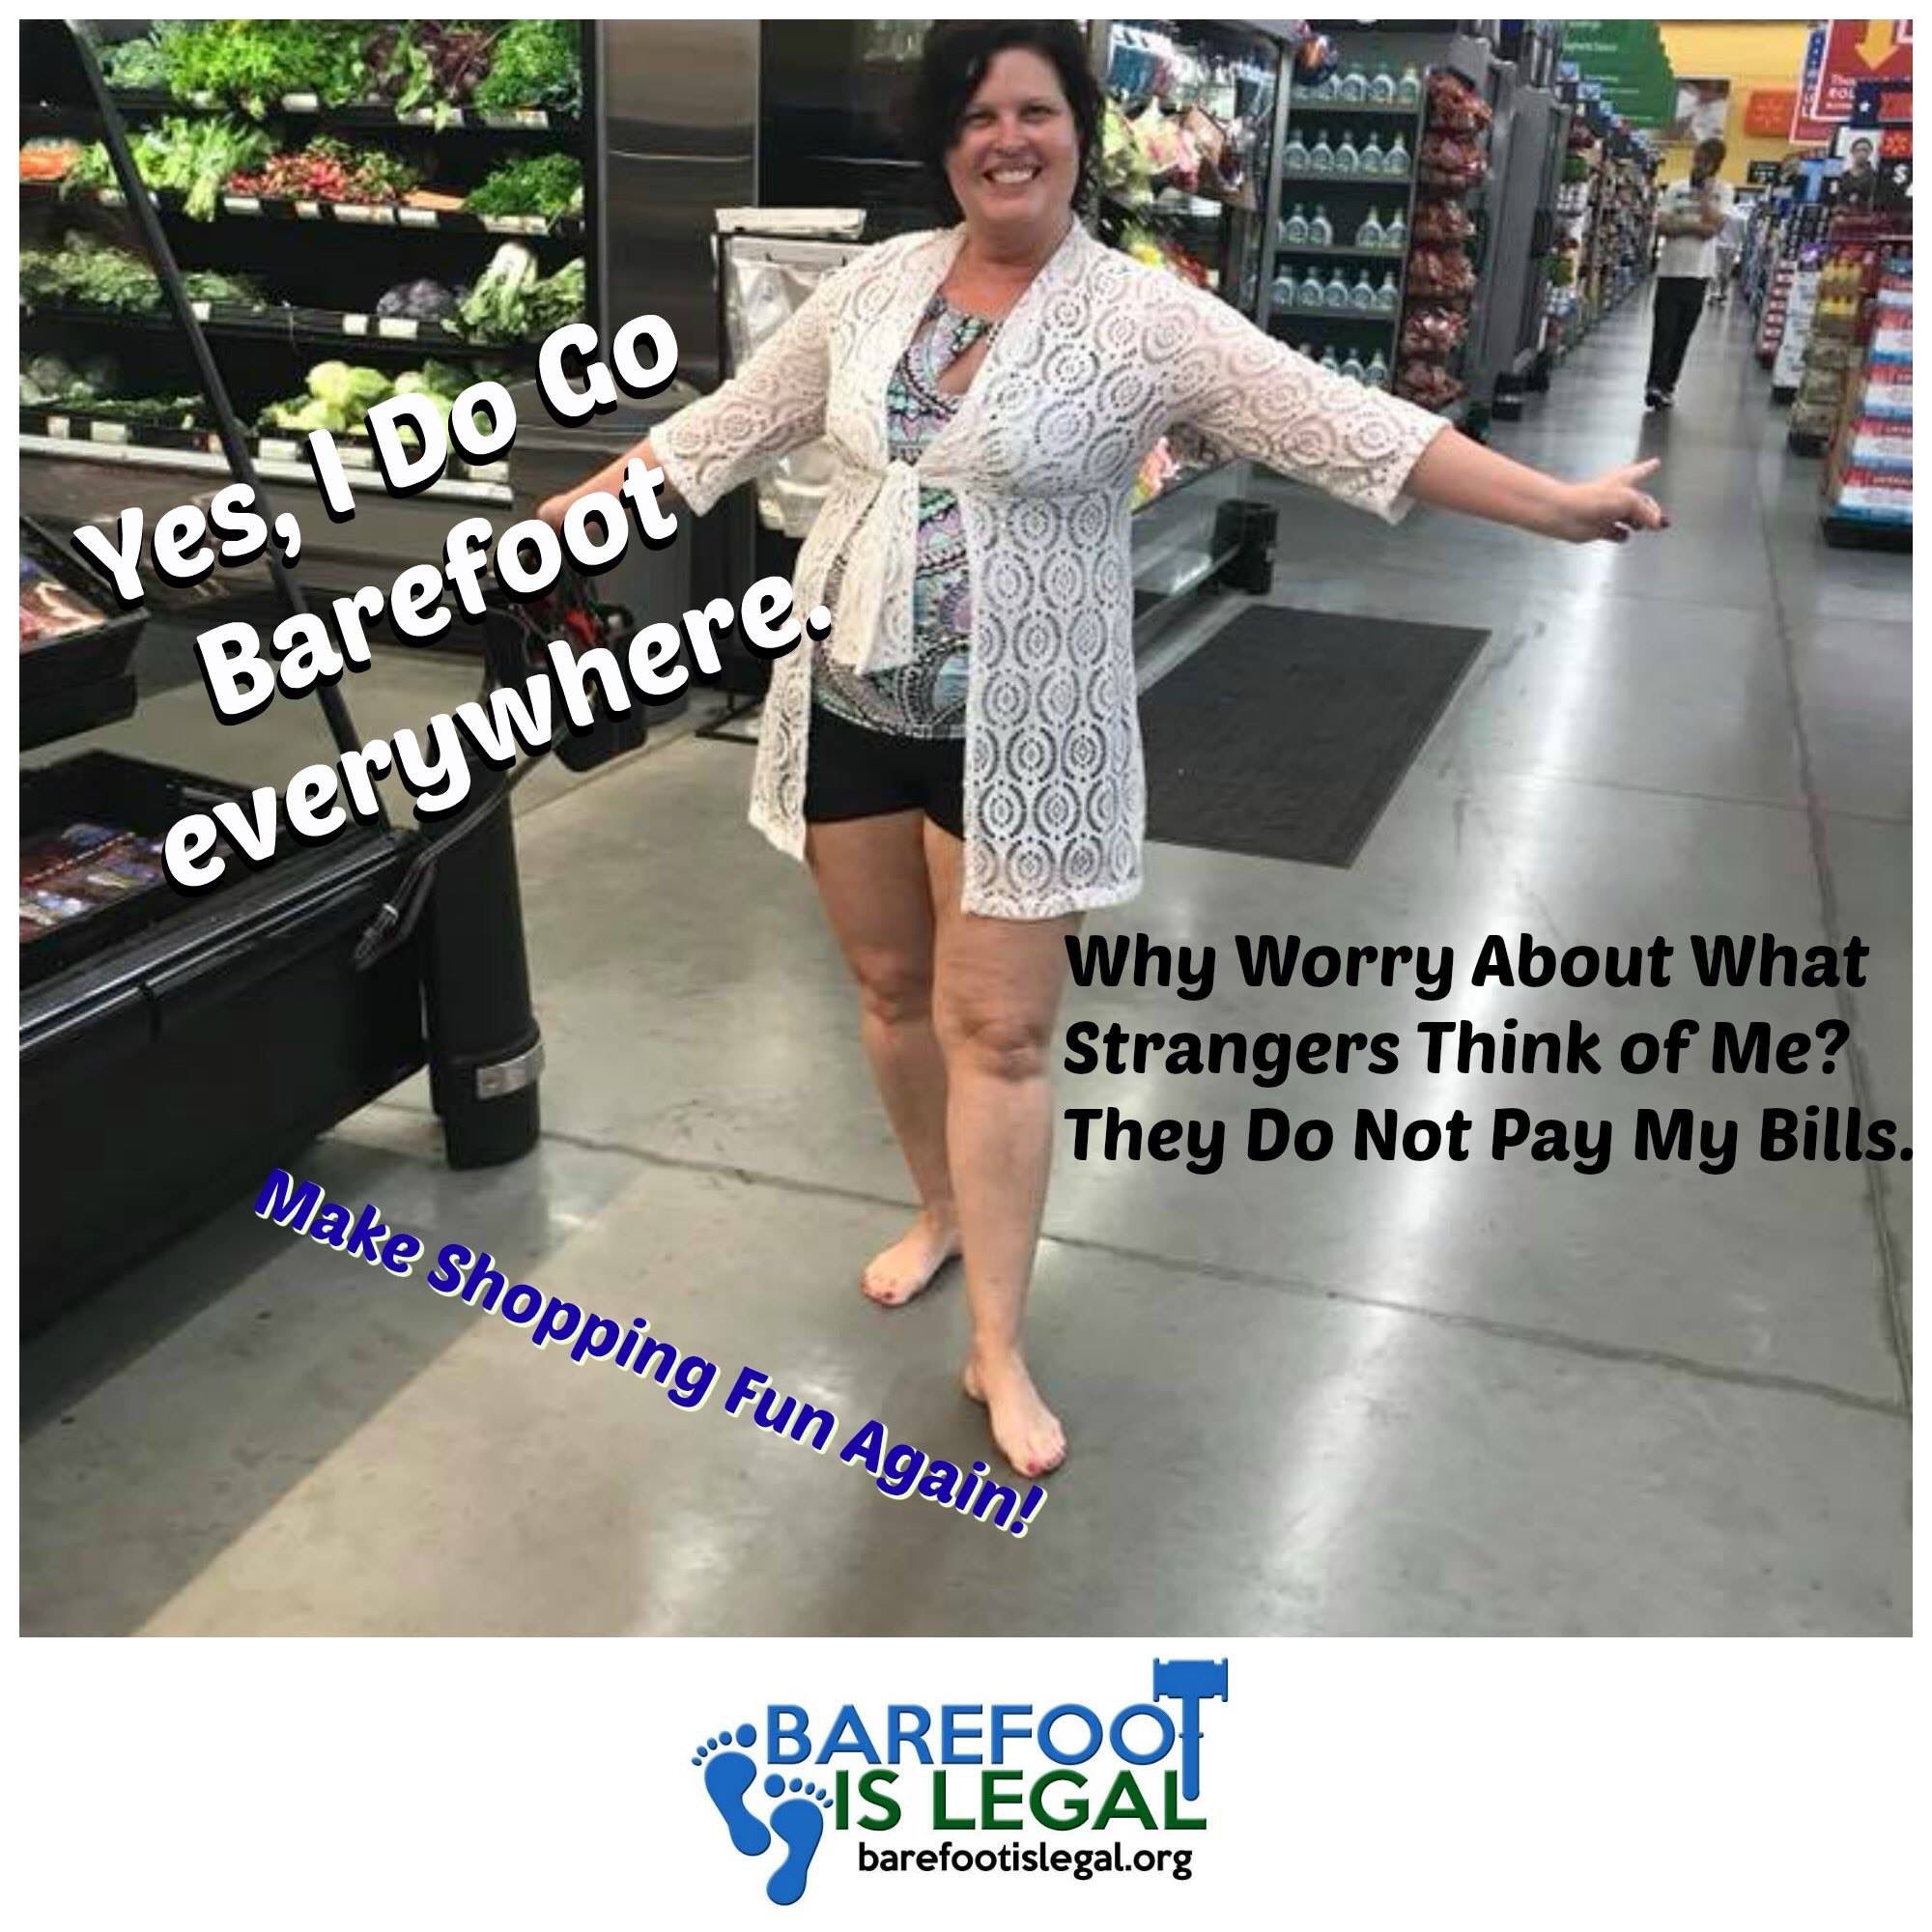 Woman Shopping Barefoot In Grocery Store